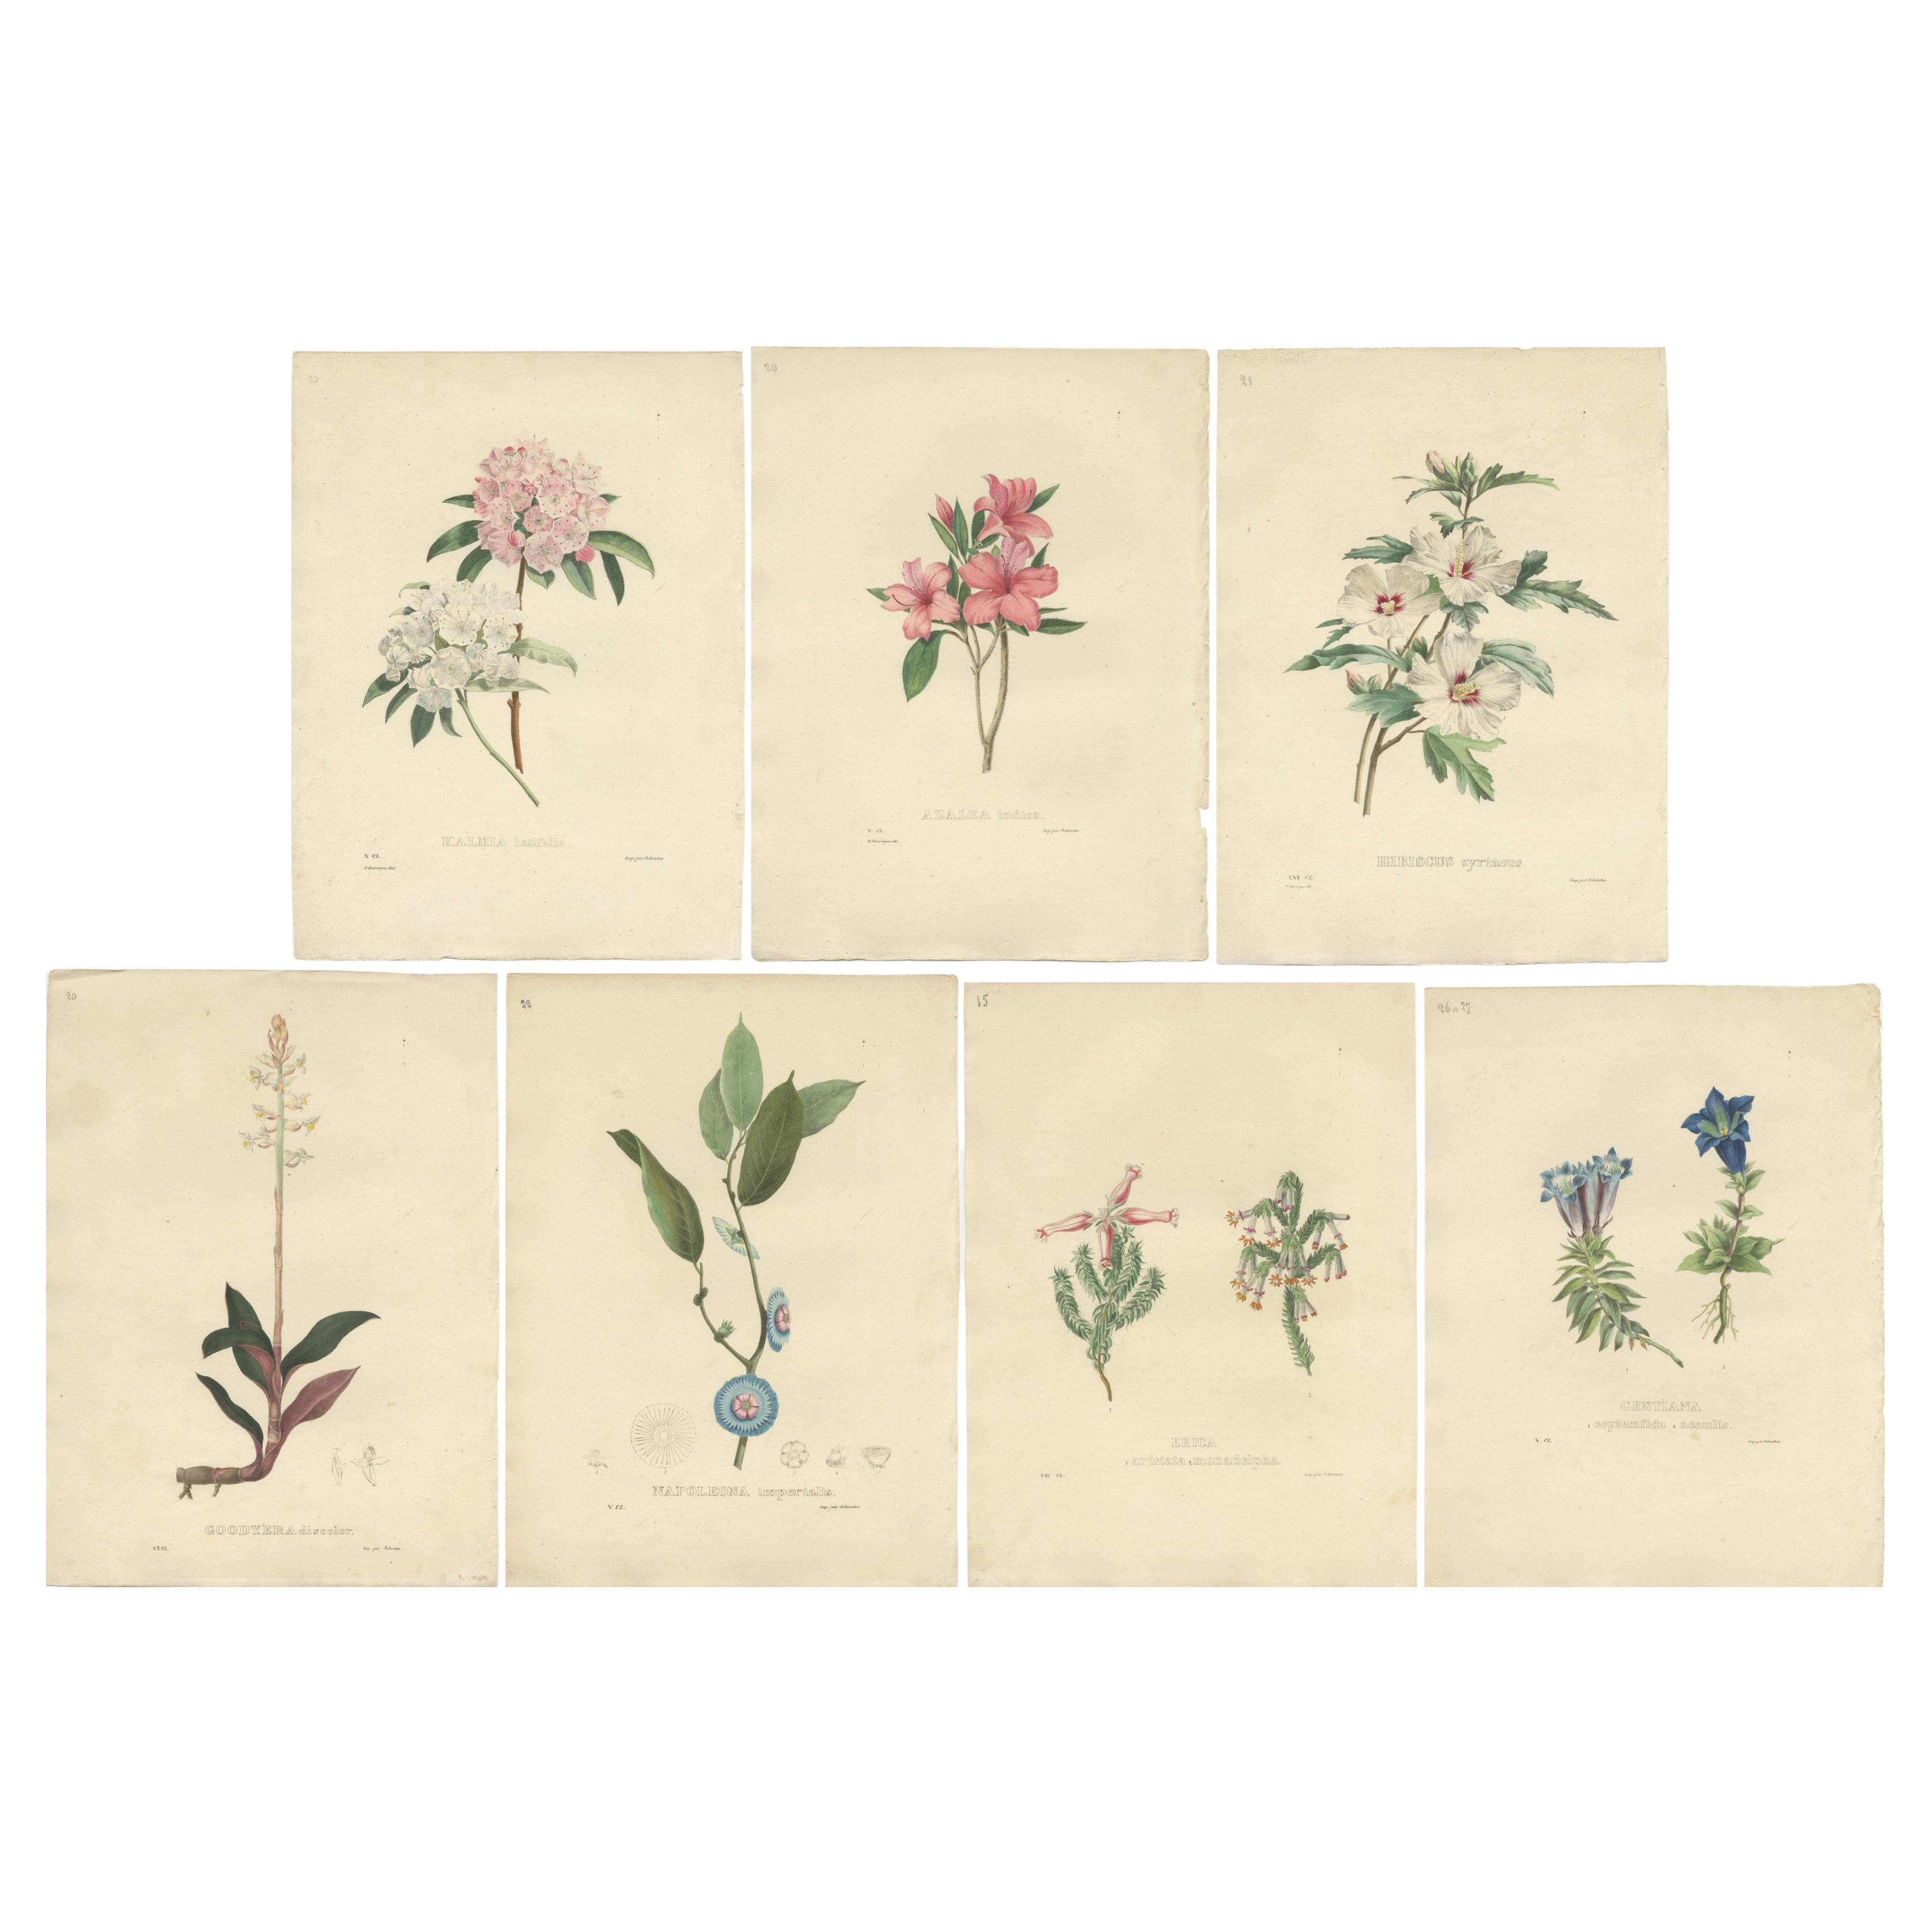 Set of 3 Antique Botanical Prints of the Husker Red and others For Sale ...